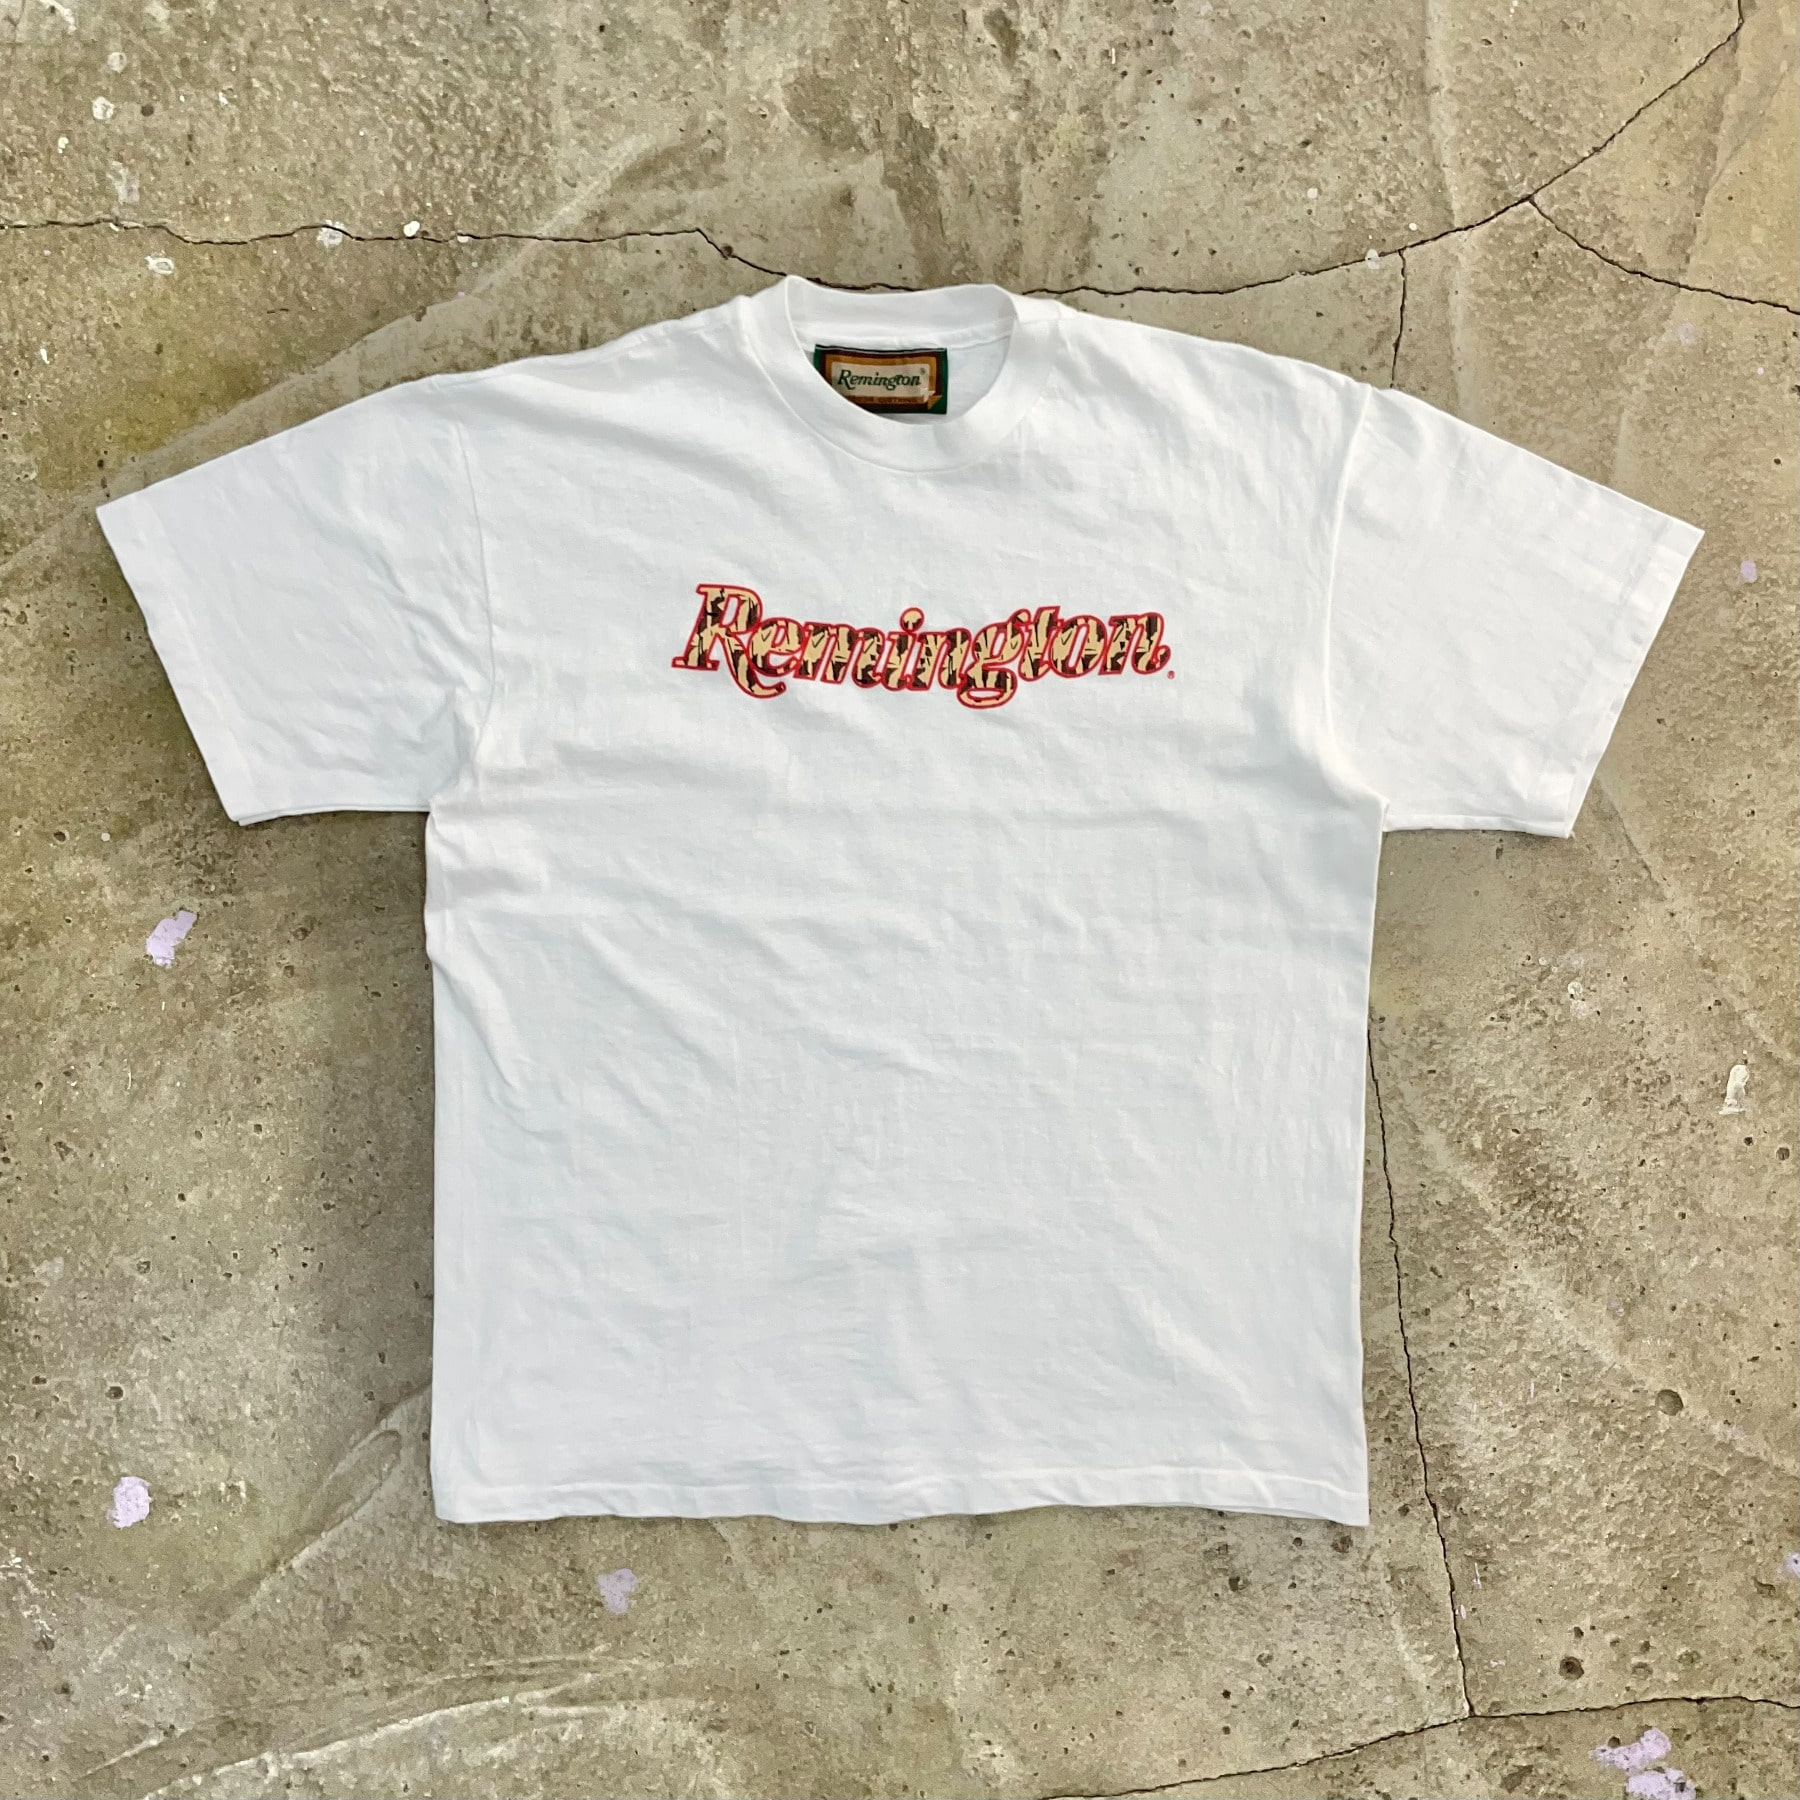 Remington Outdoor Tee (Made in USA) - L